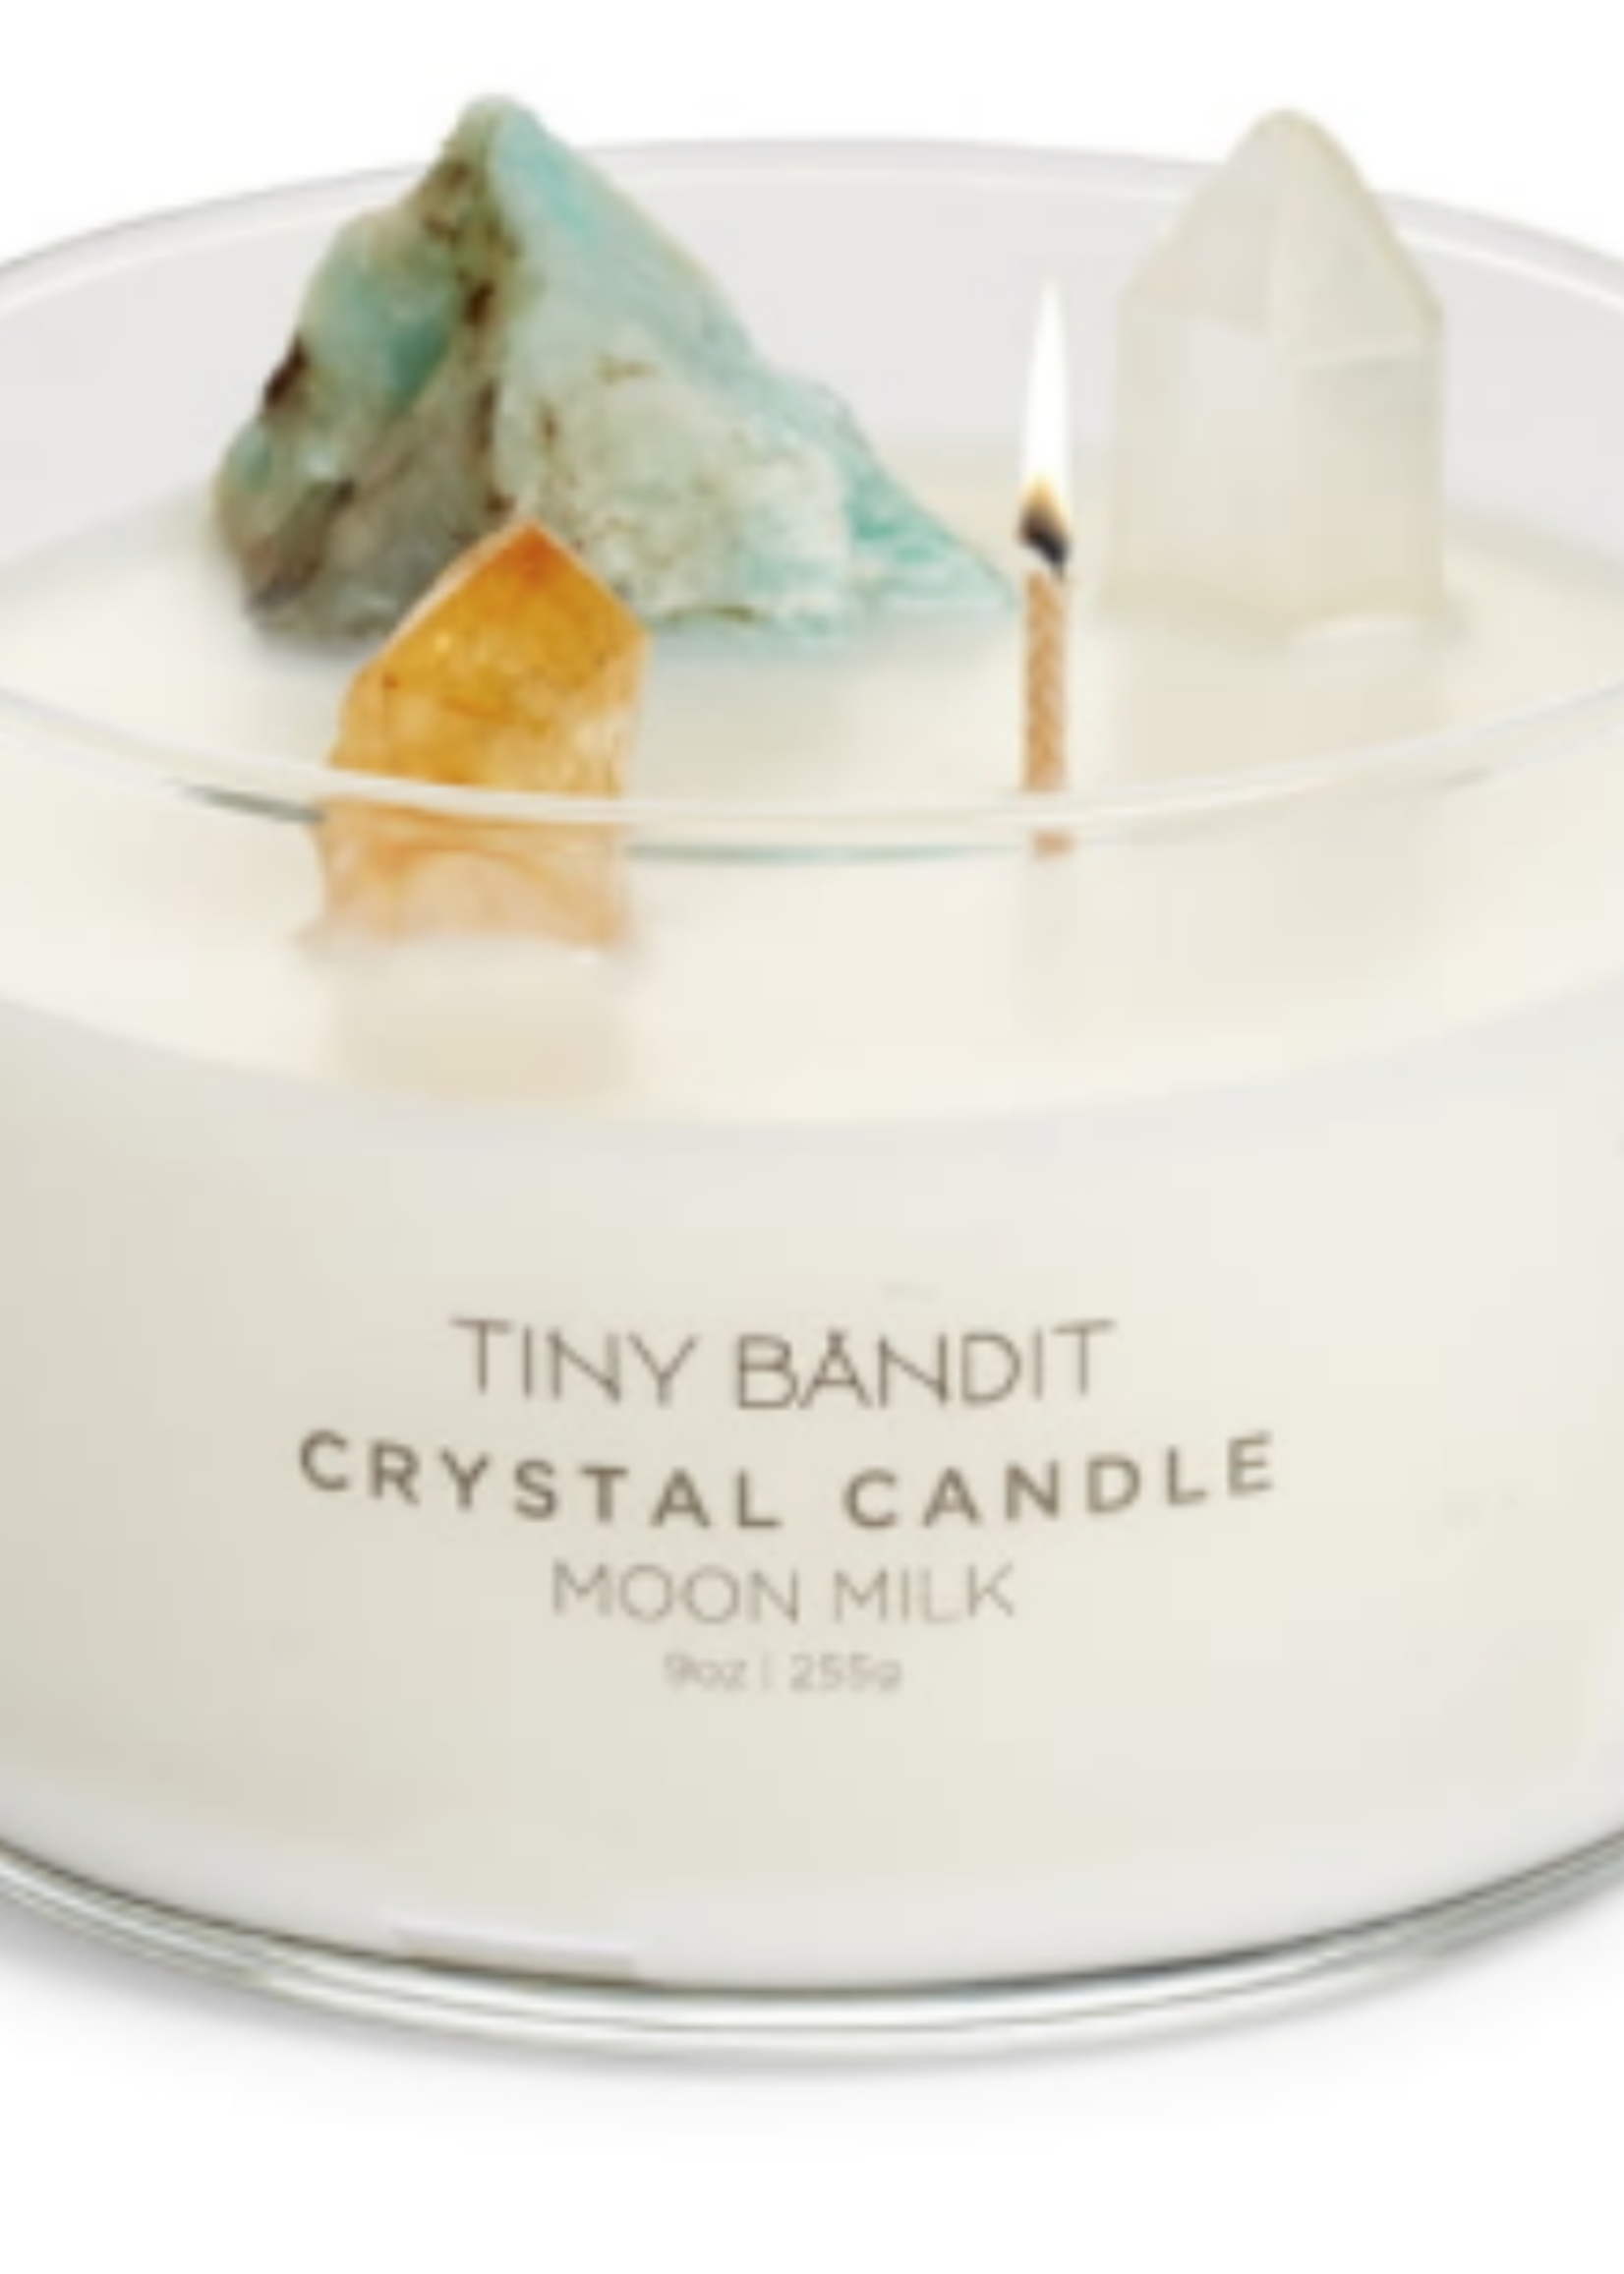 TINY BANDIT CRYSTAL CANDLE 9OZ IN BAG